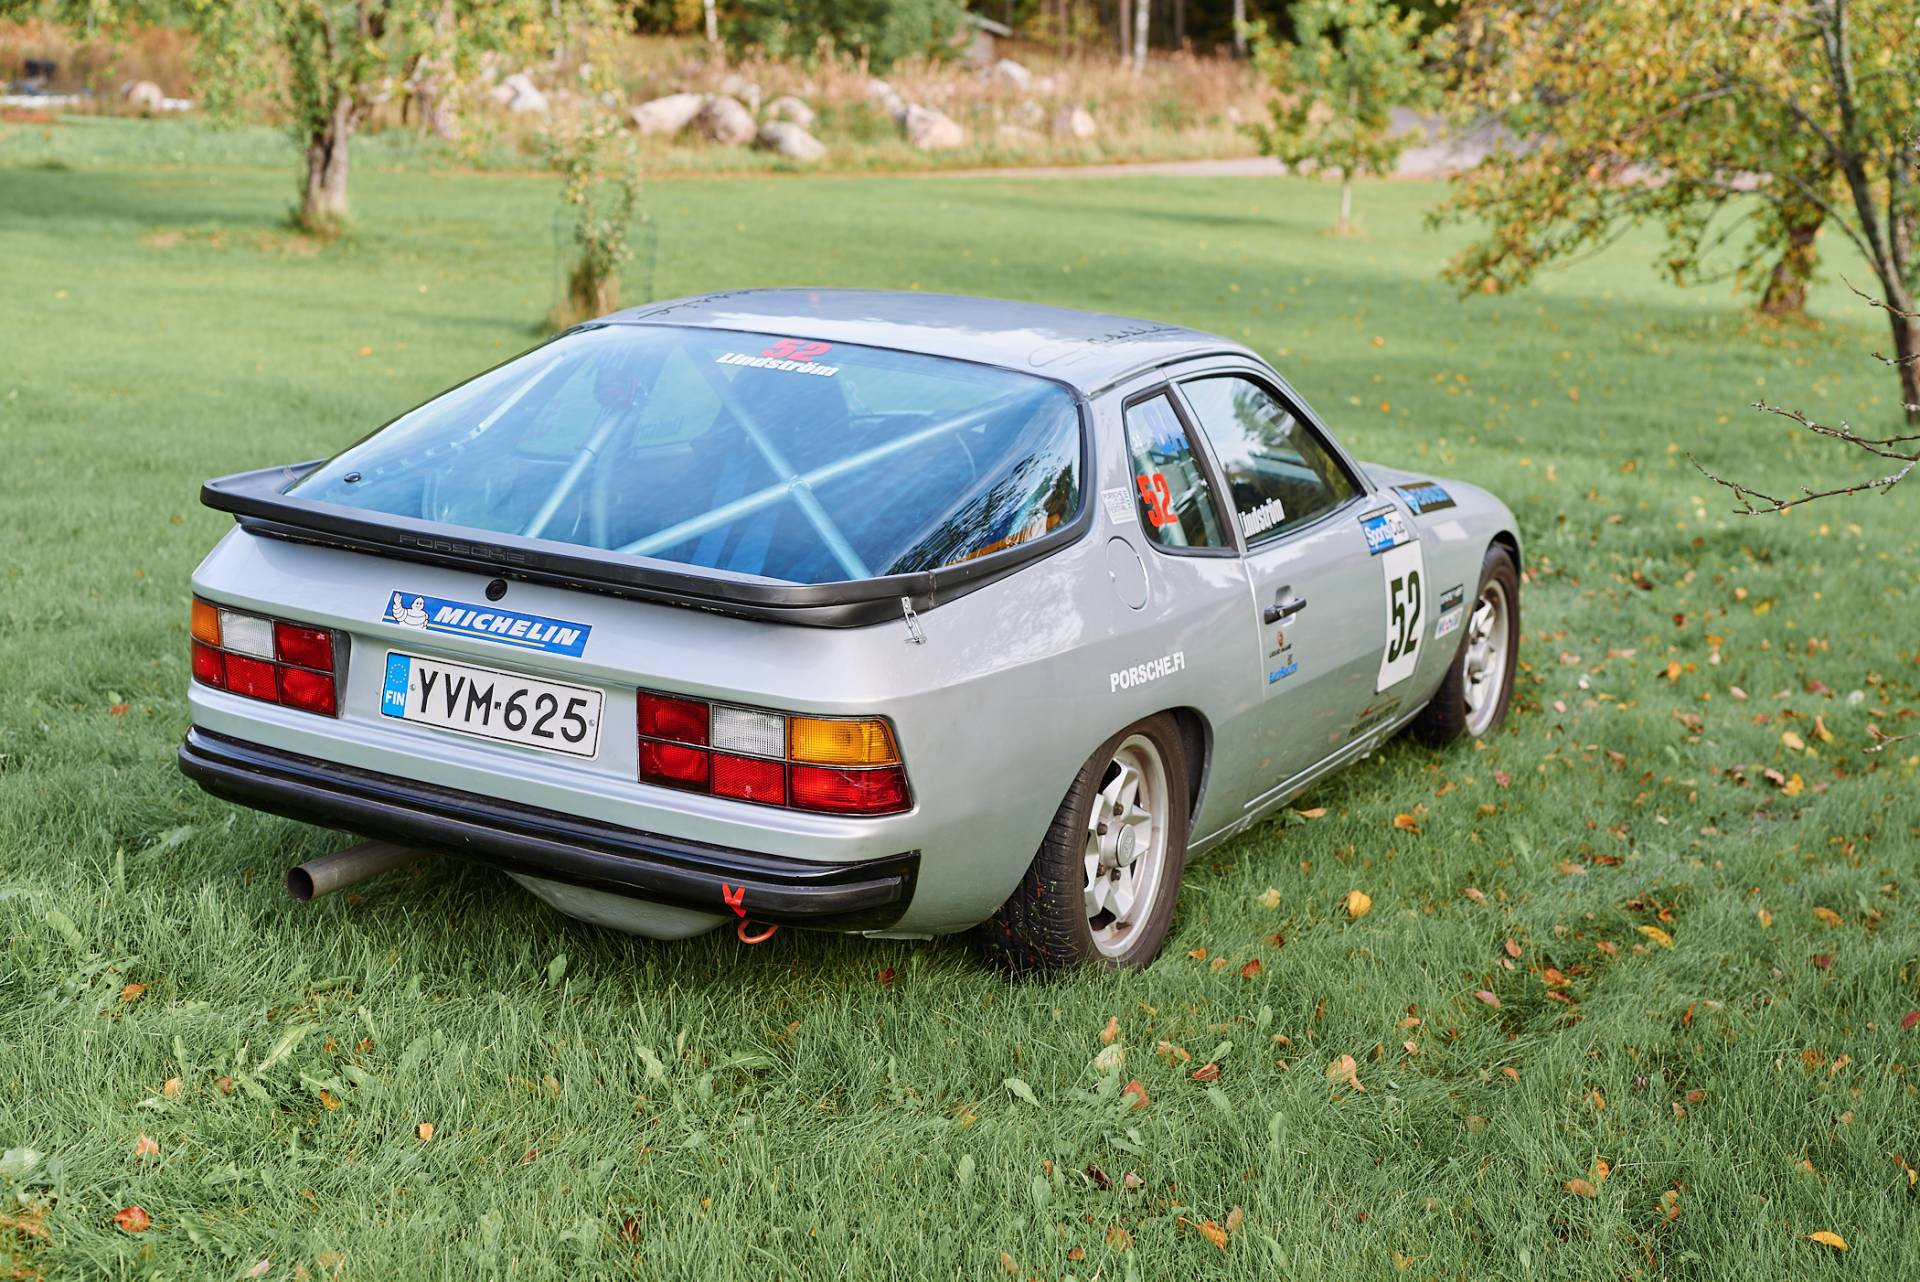 For Sale Porsche 924 Turbo (1979) offered for GBP 26,894